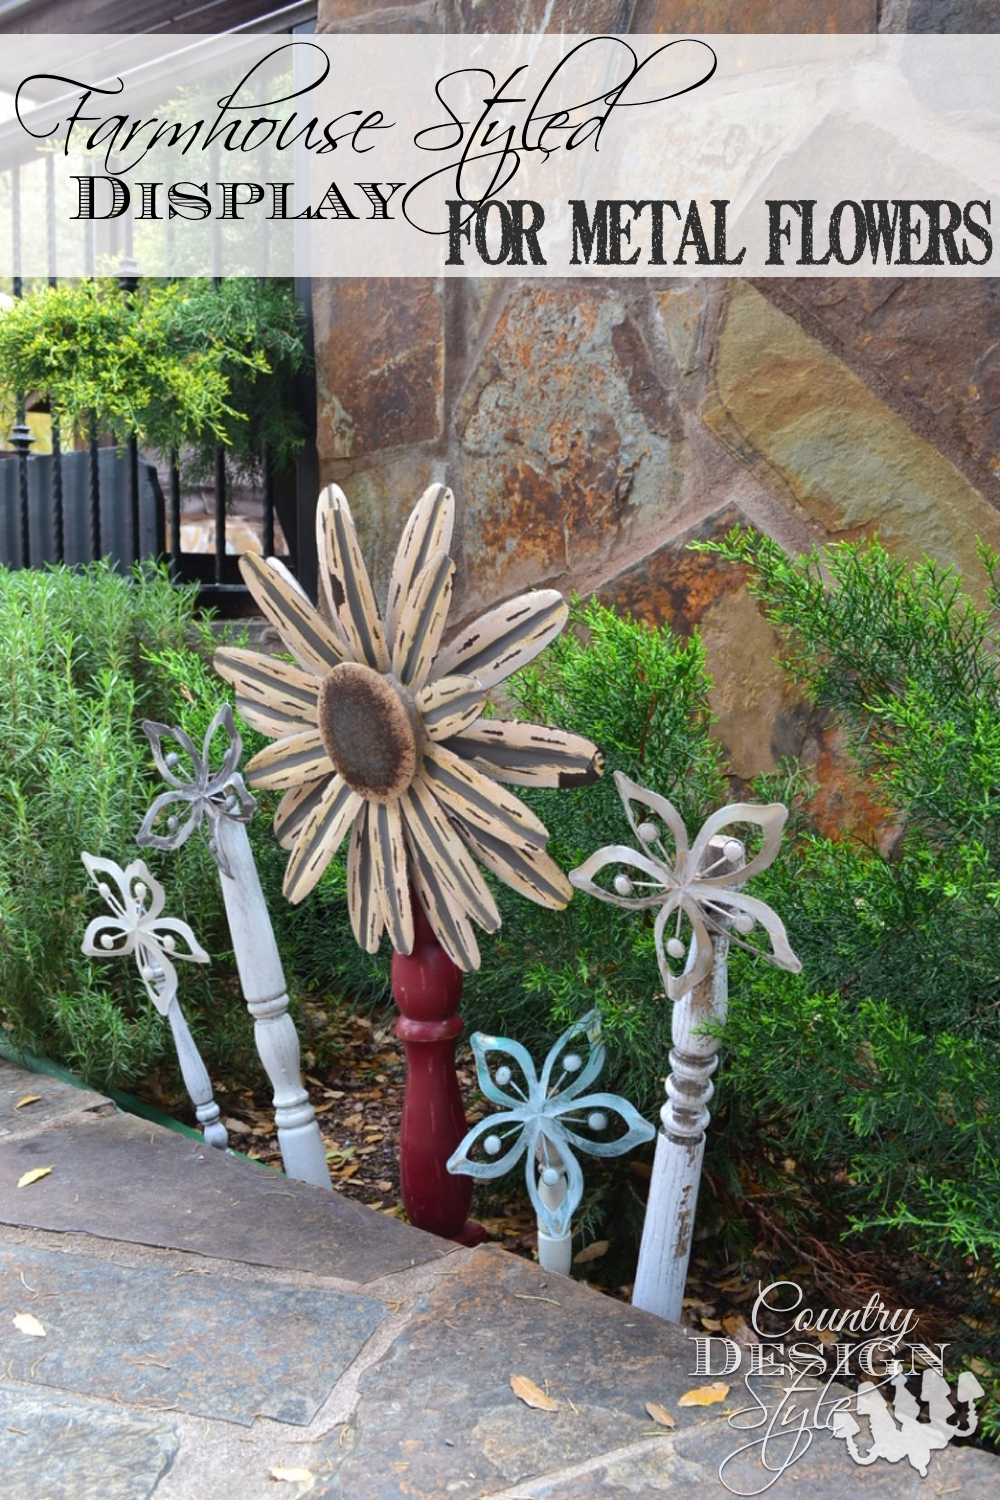 Farmhouse styled display for metal flowers. Metal flower in a bold style get a vintage twist for our garden. Country Design Style